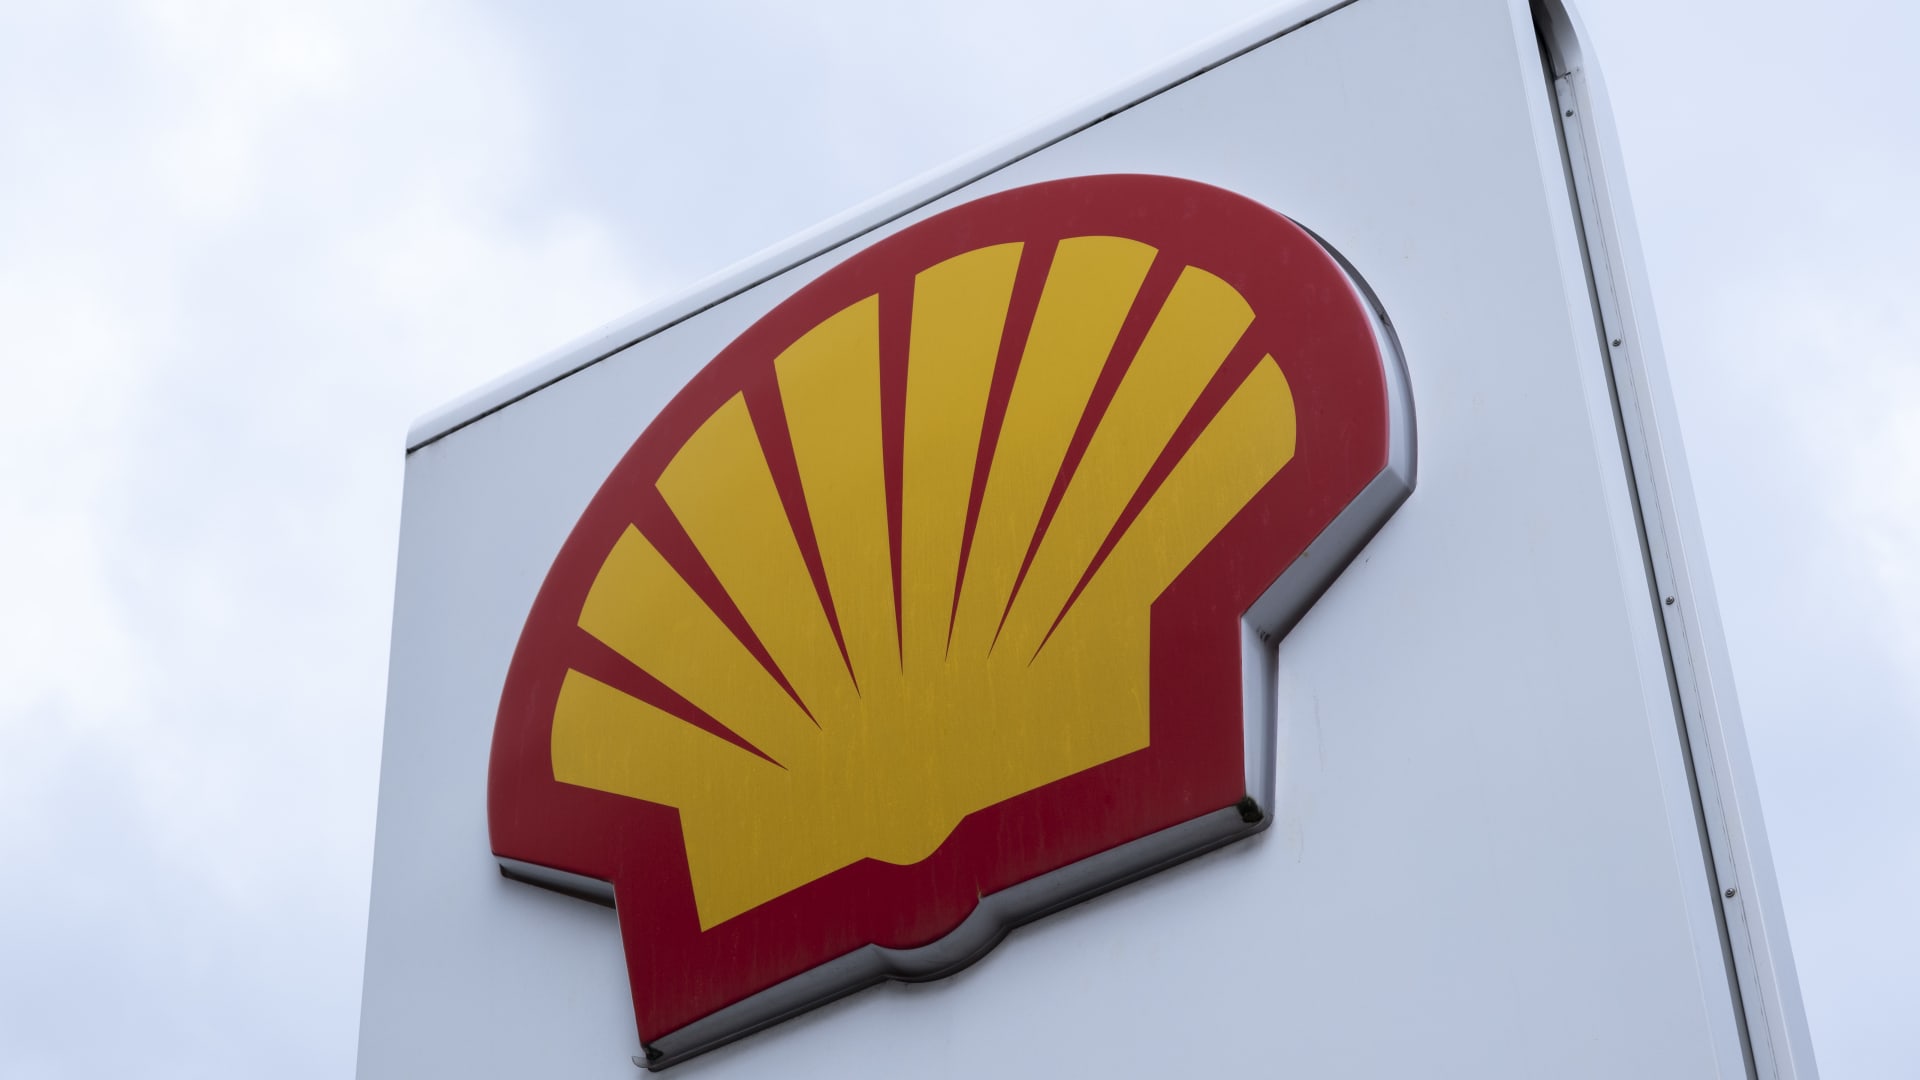 Oil giant Shell's UK ad campaign banned for being 'likely to mislead' consumers